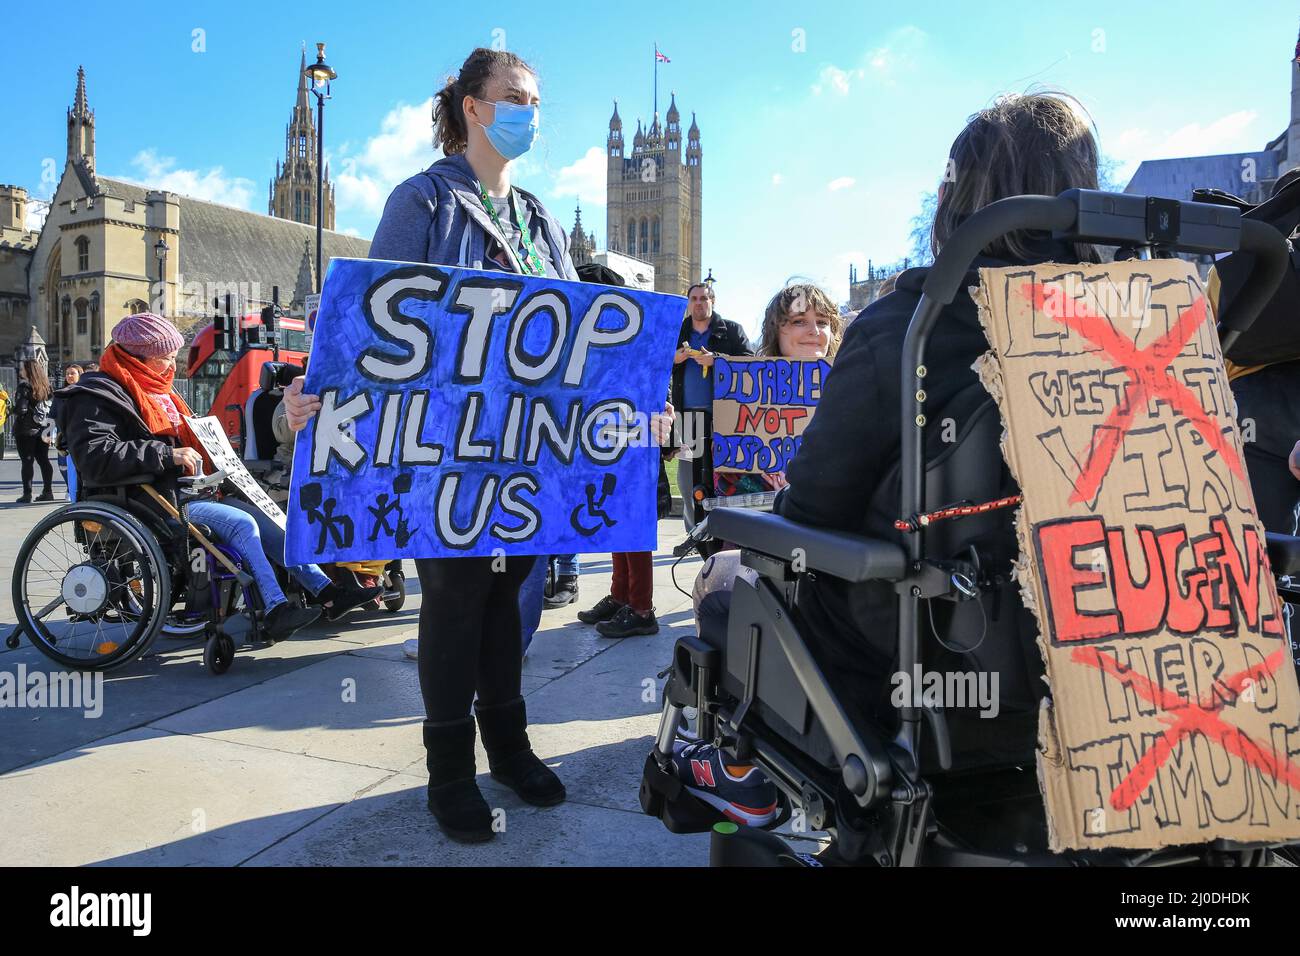 London, UK. 18th Mar, 2022. Protesters on Parliament Square. A rally organised by the Disabled People's Direct Action Networks see people protesting against what they perceive as a failure by government to protect disabled people adequately during the ongoing covid pandemic. Credit: Imageplotter/Alamy Live News Stock Photo